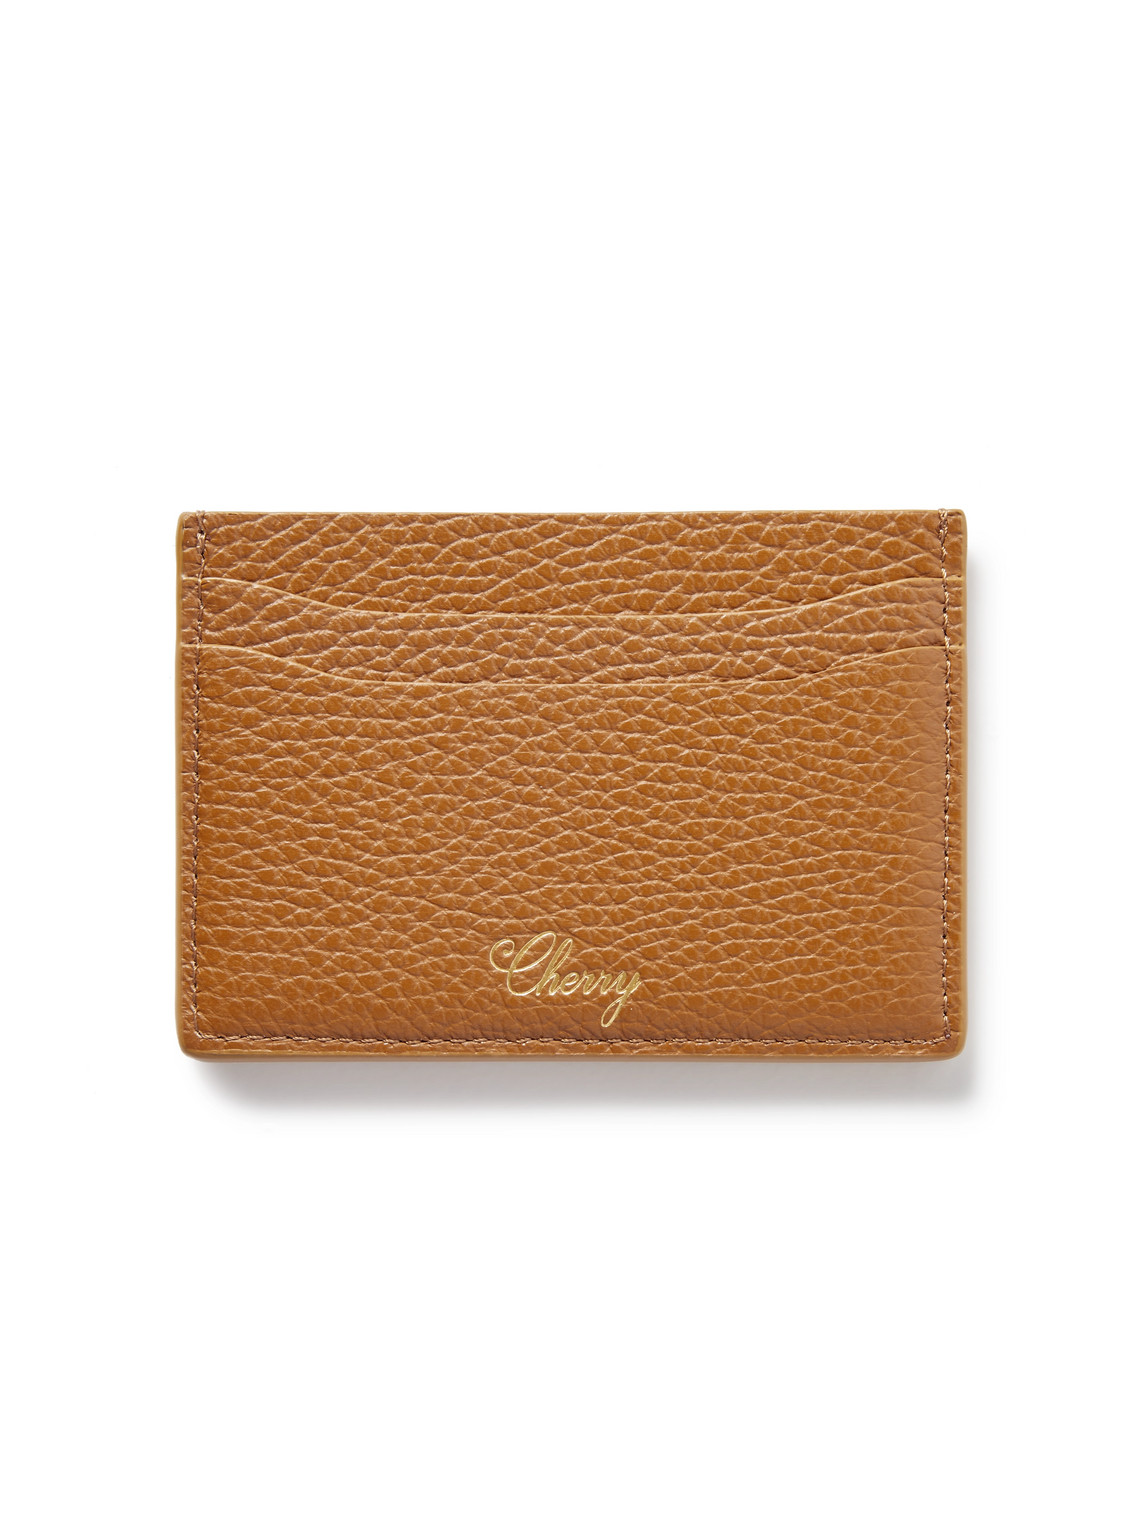 Cherry Los Angeles Full-grain Leather Cardholder In Brown